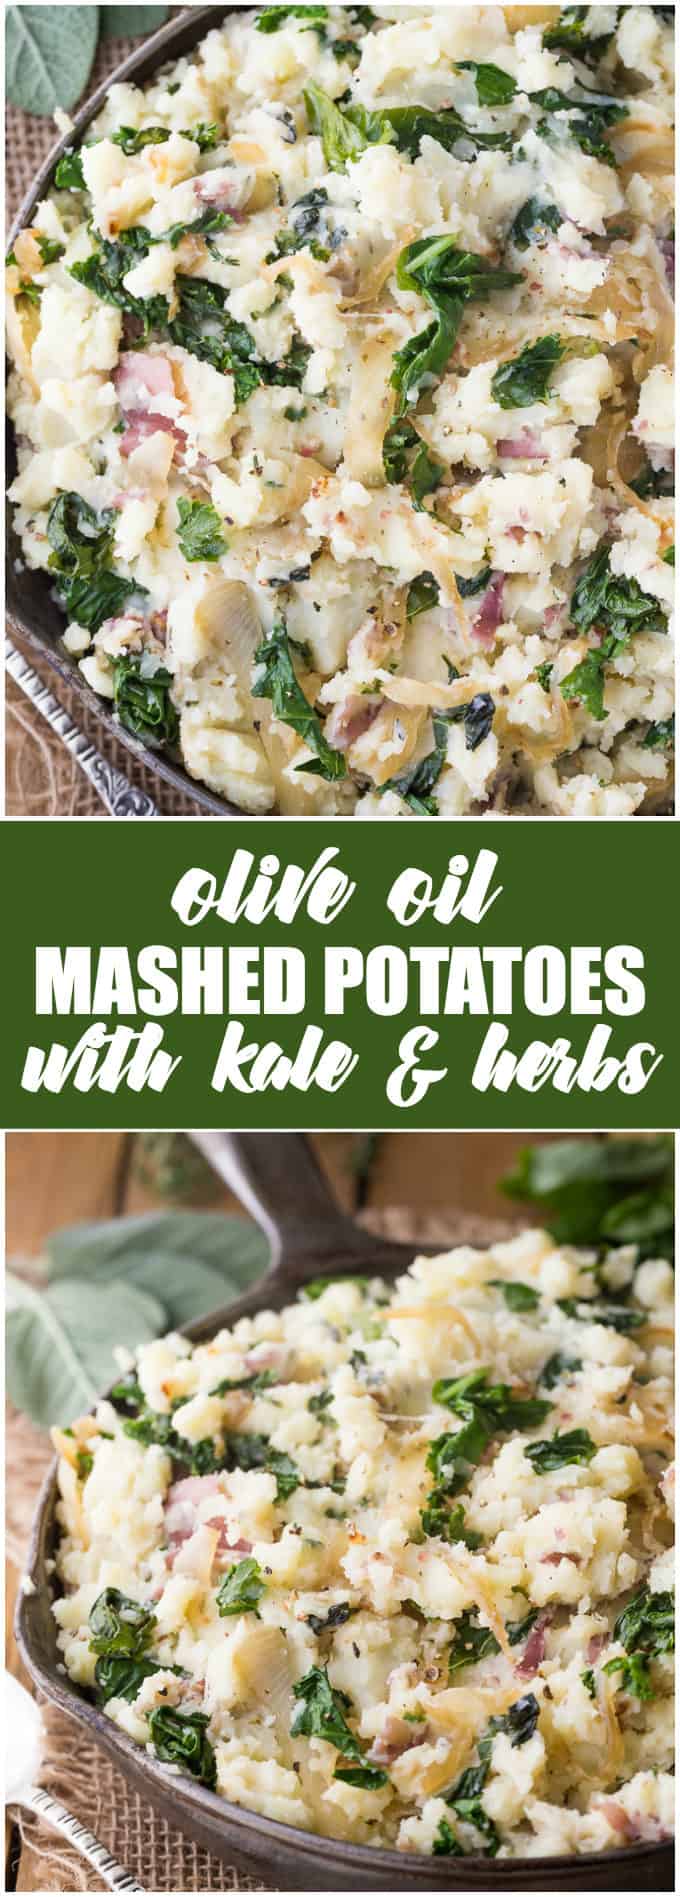 Olive Oil Mashed Potatoes wIth Kale & Herbs - Skip the dairy for these garlic & herb mashed potatoes. This flavorful side dish is great for holiday dinners or weeknight meals.